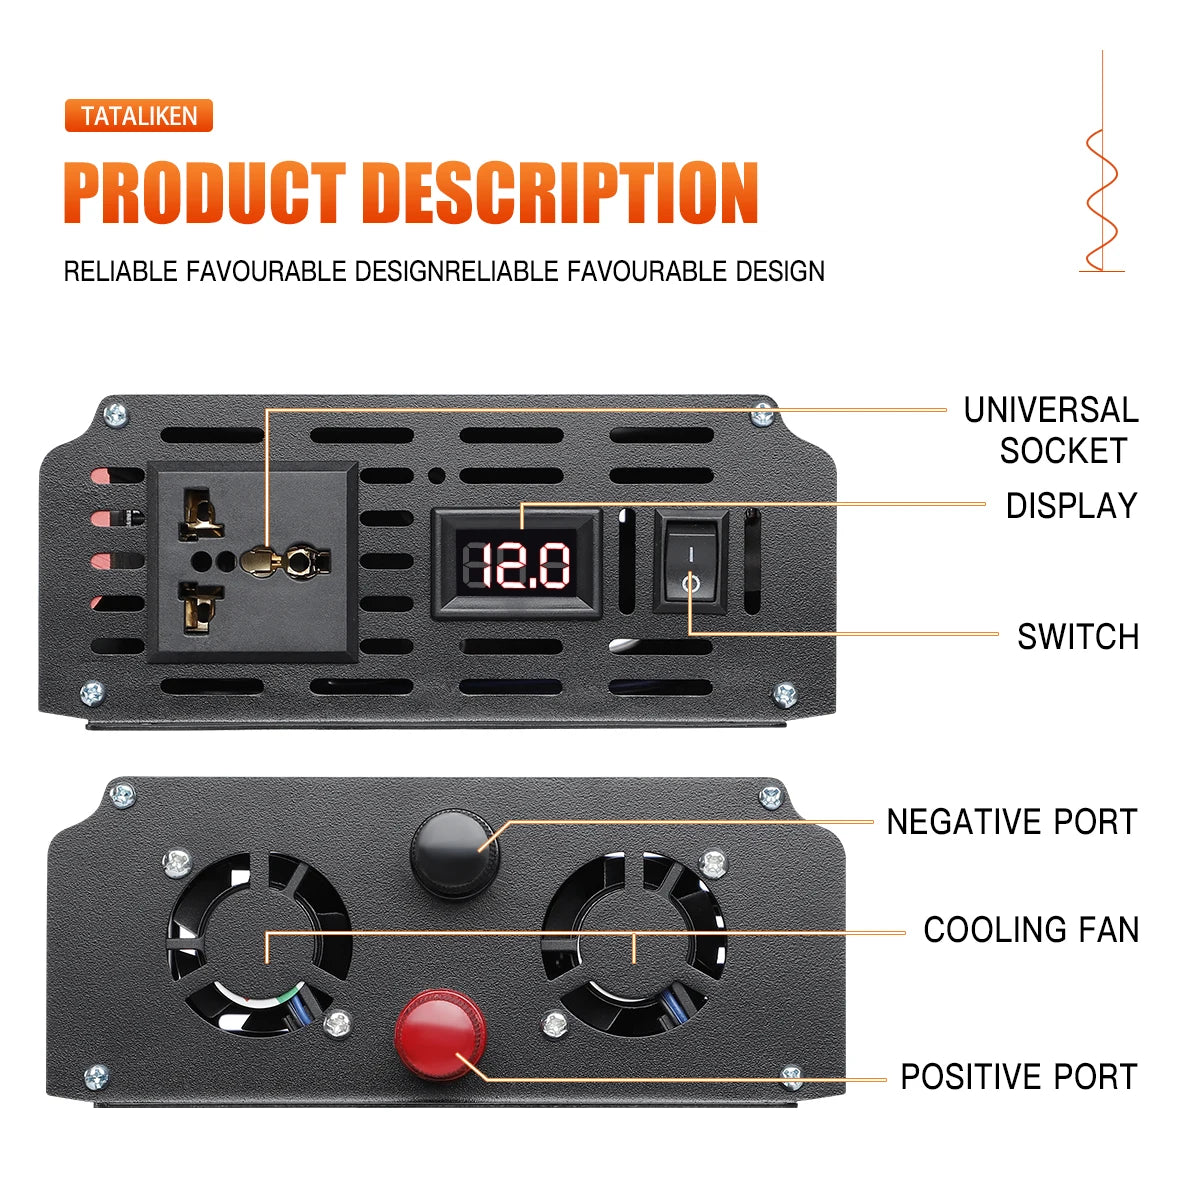 pure sine wave inverter, Design features a reliable and favorable layout with a socket display, multiple ports, and a cooling fan.